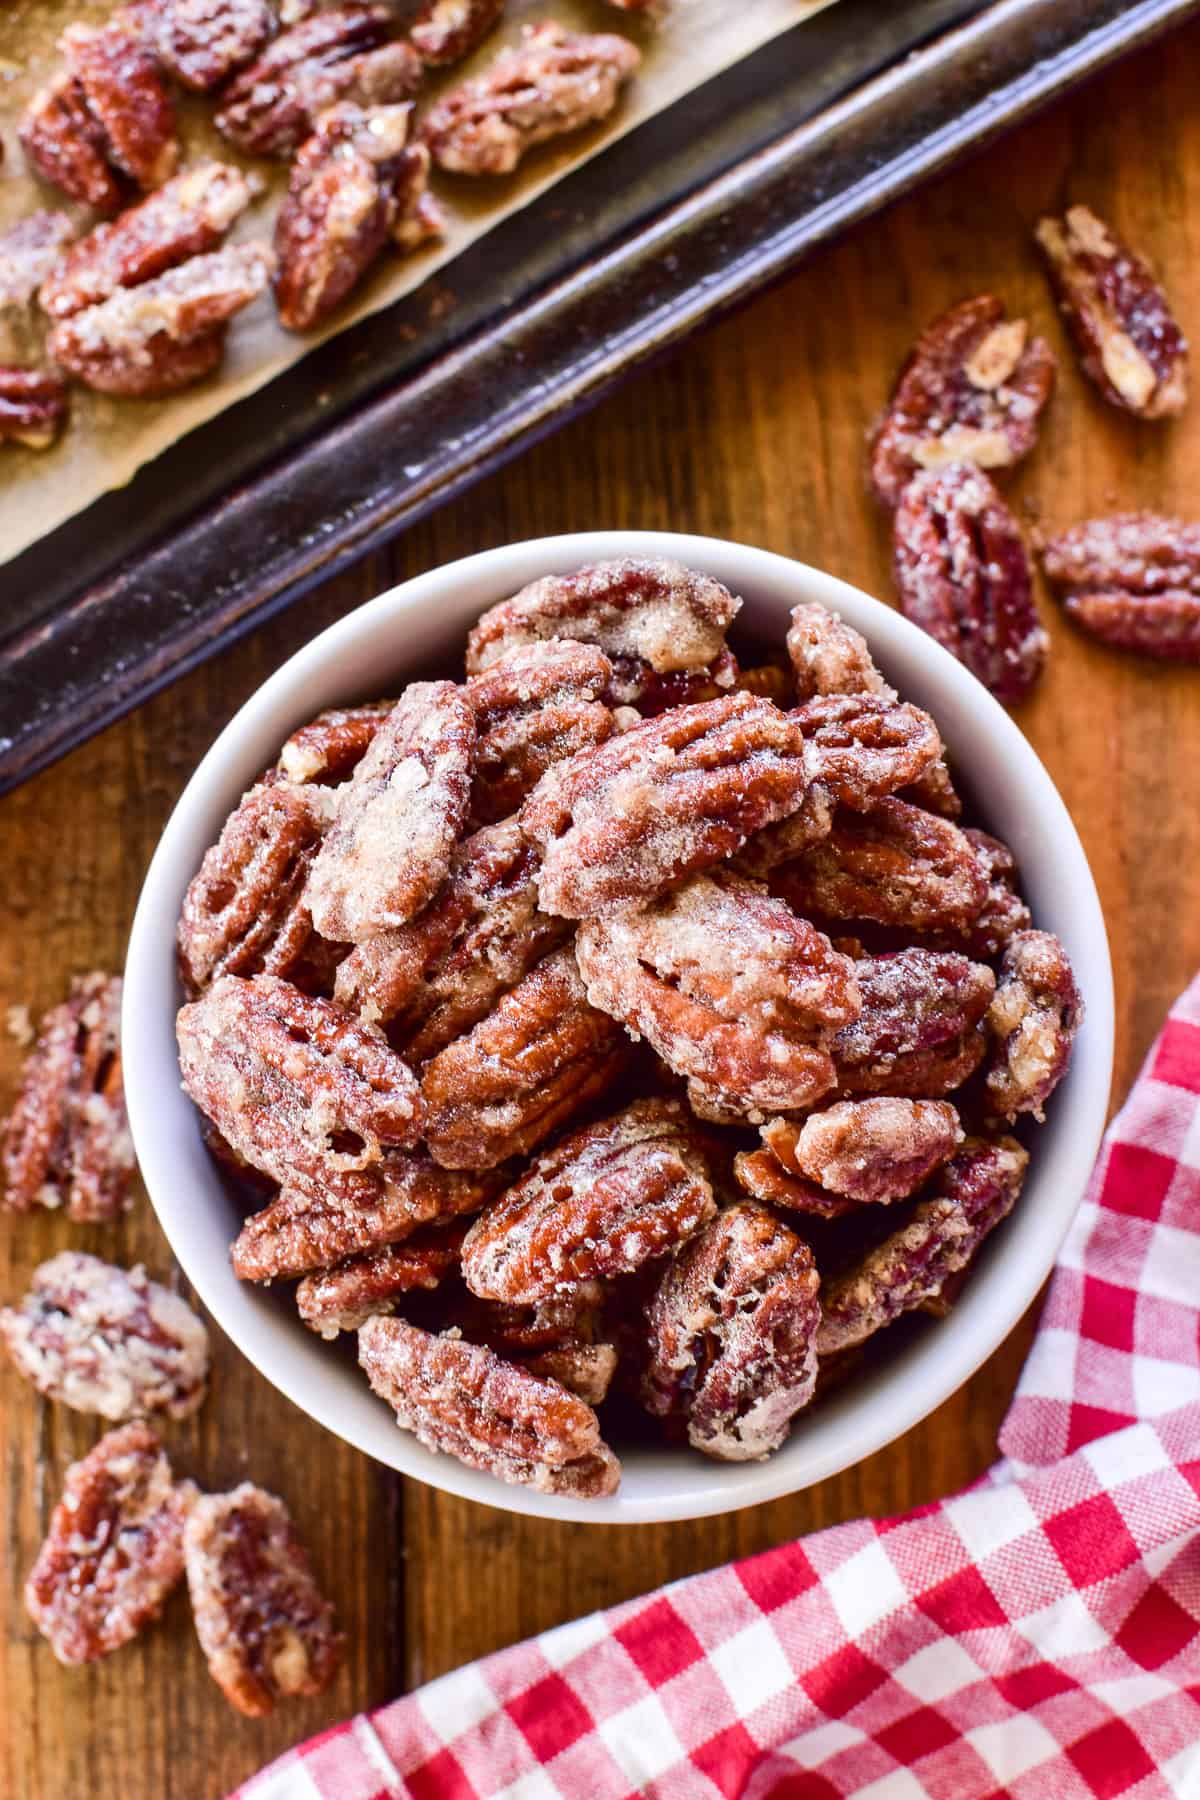 Candied Pecans in a white bowl with a red & white gingham towel